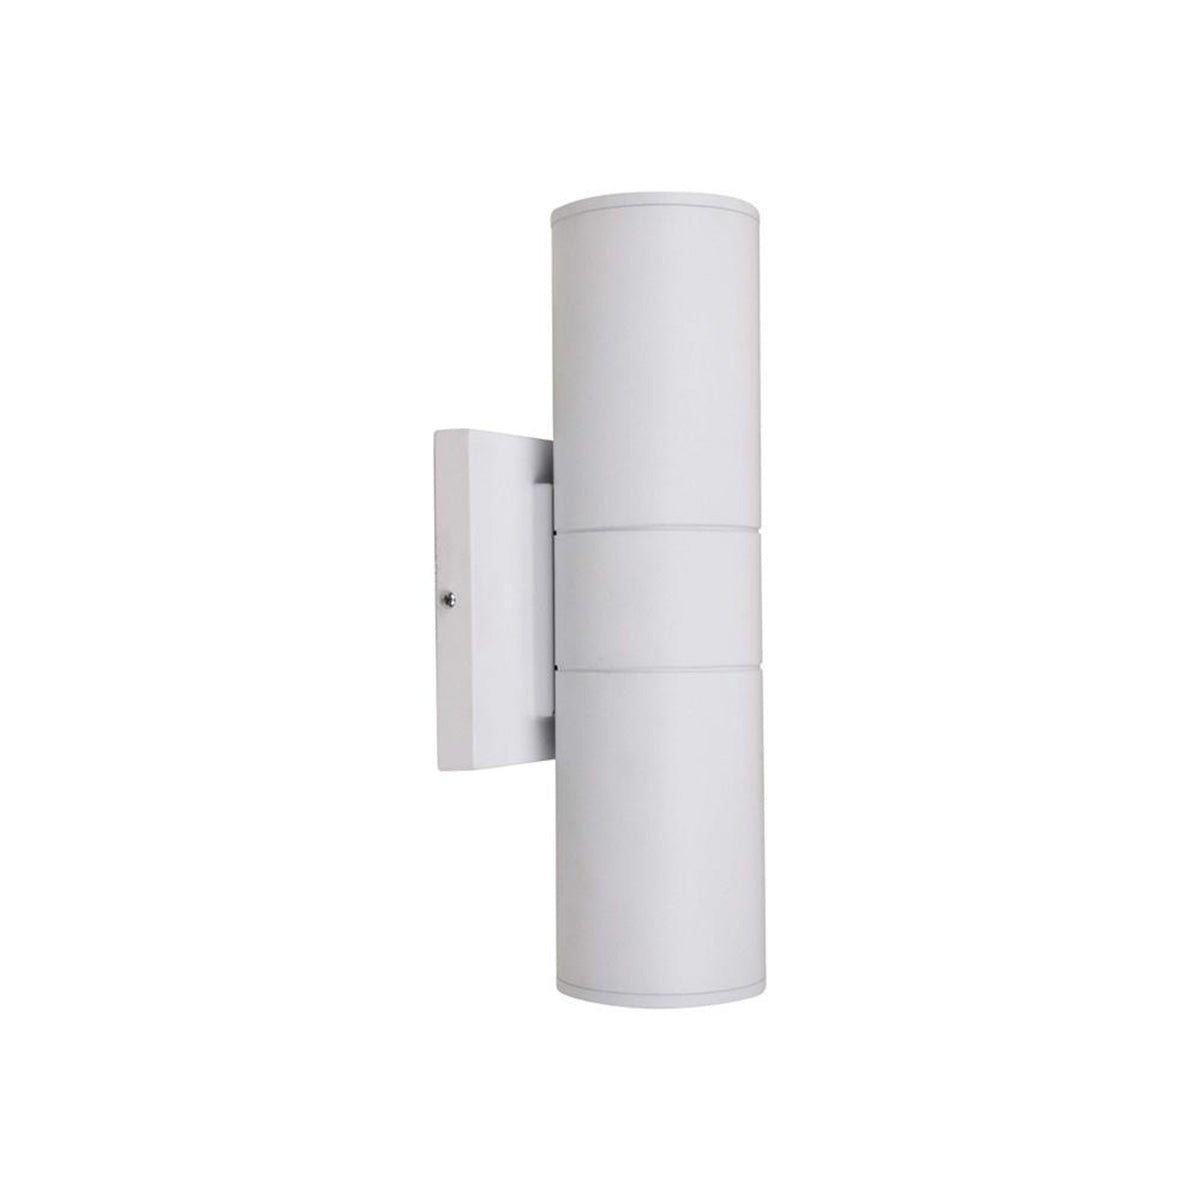 12 In 2 Lights LED Outdoor Cylinder Wall Light Up/Down Lights 3000K White Finish - Bees Lighting